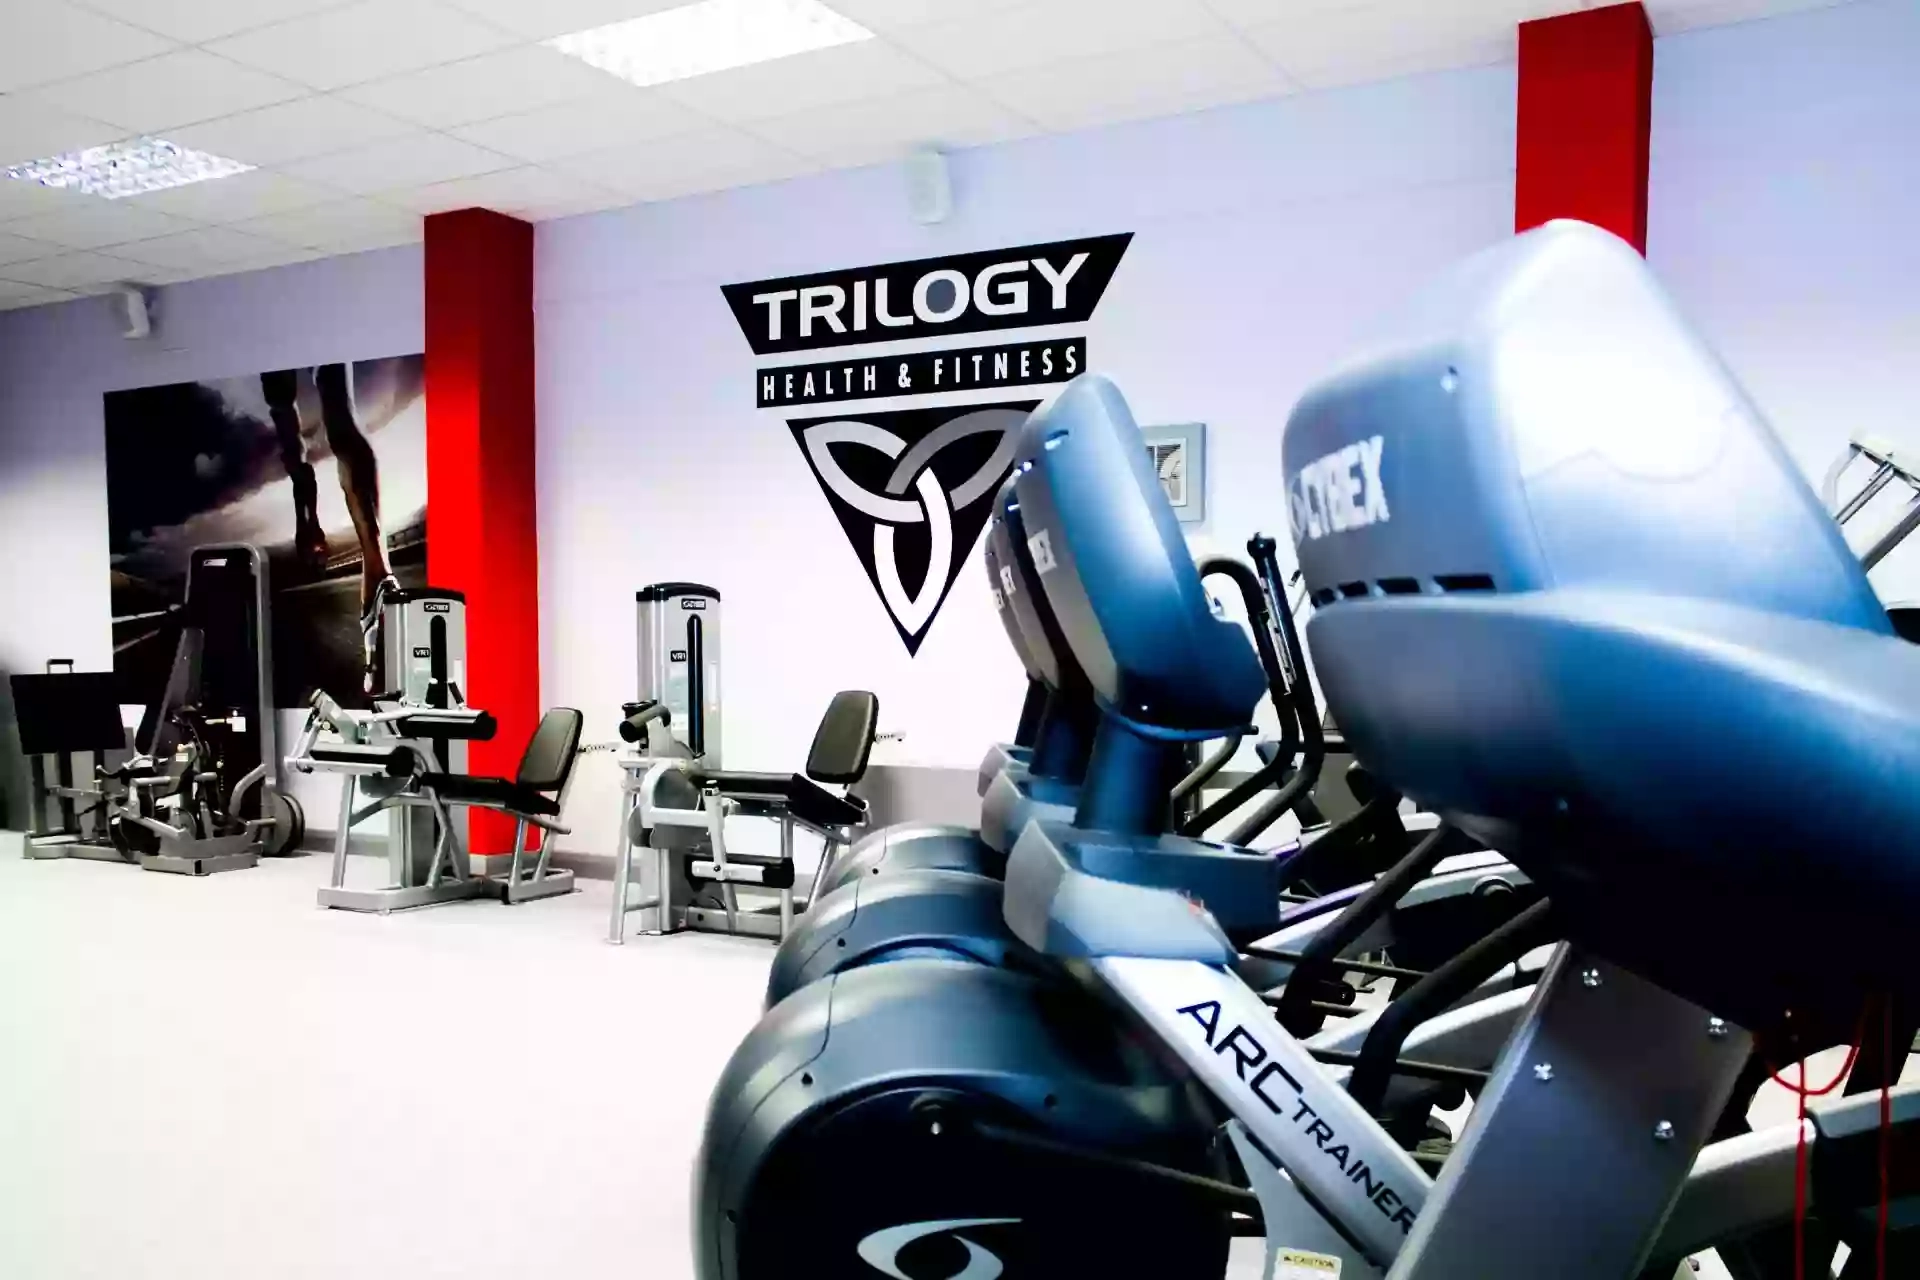 Trilogy Health & Fitness at Cripps